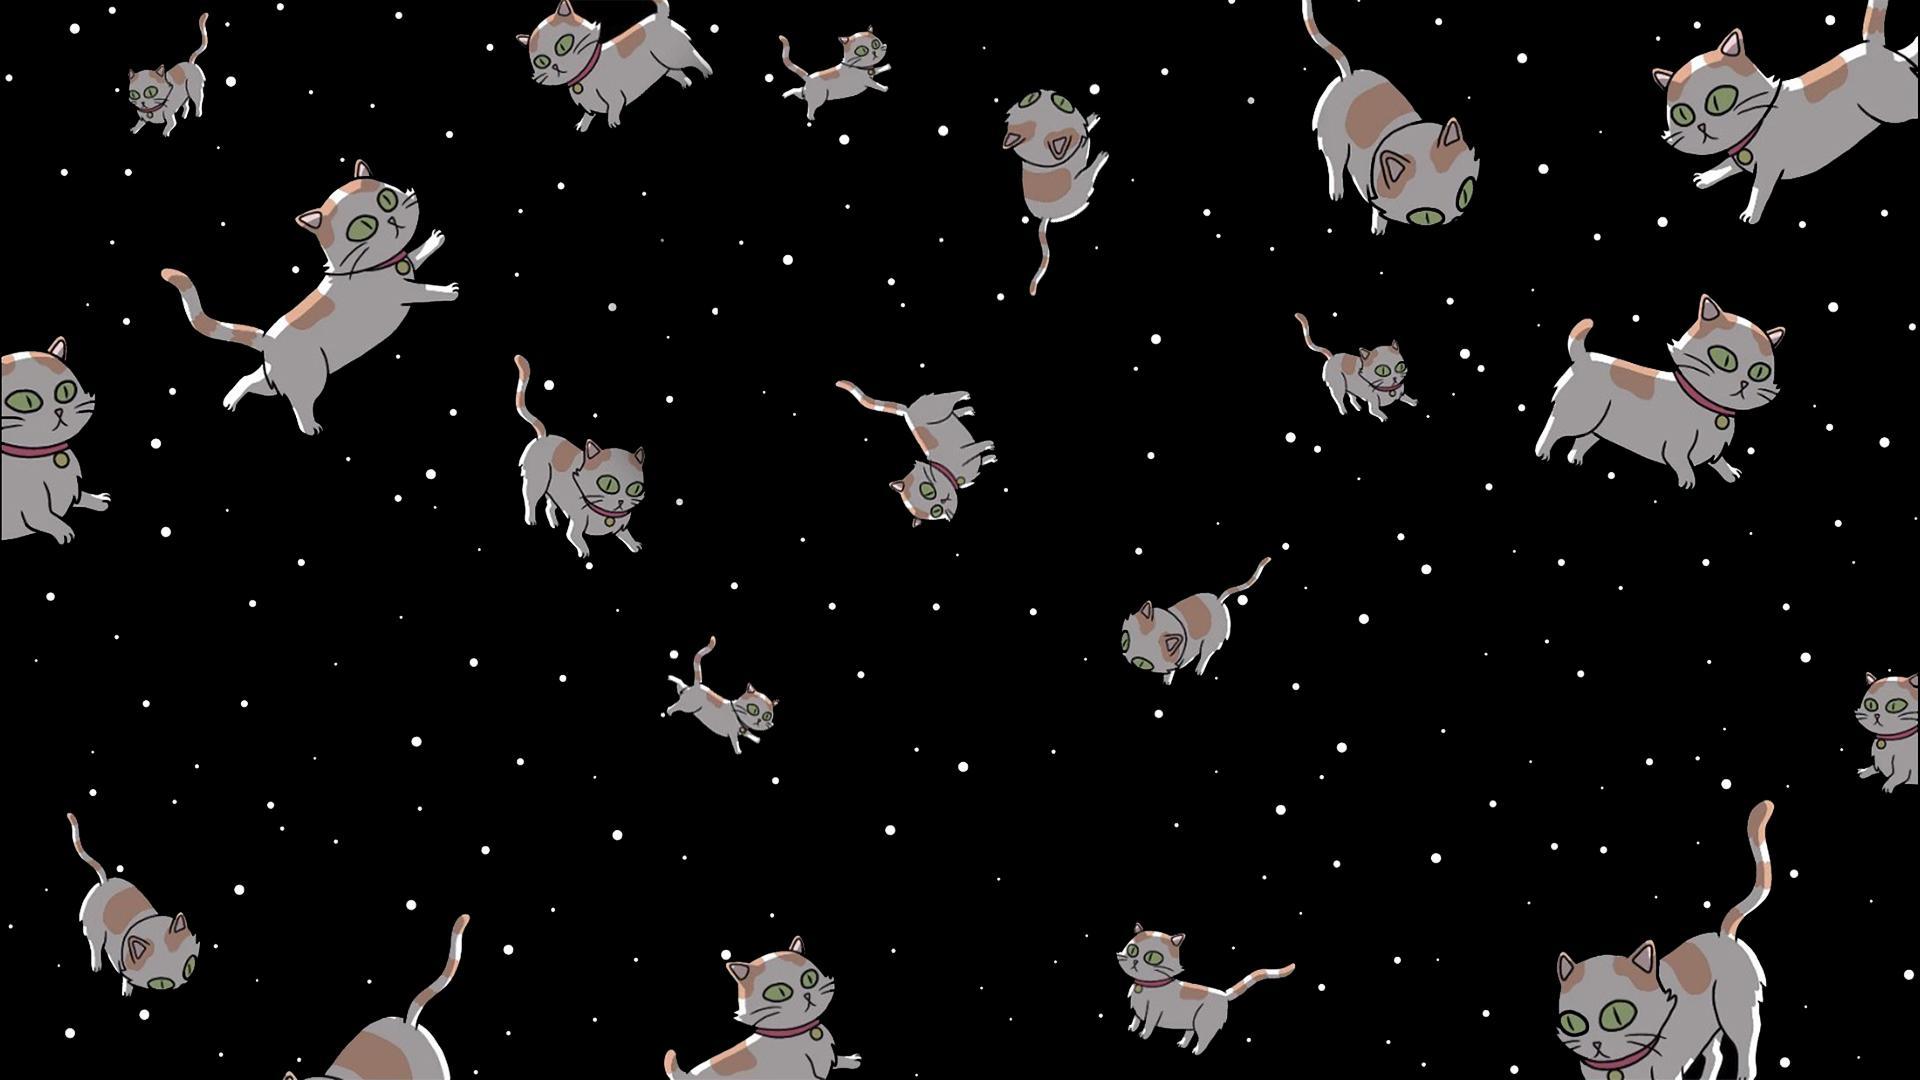 Noticed a disturbing lack of space cat wallpaper around so